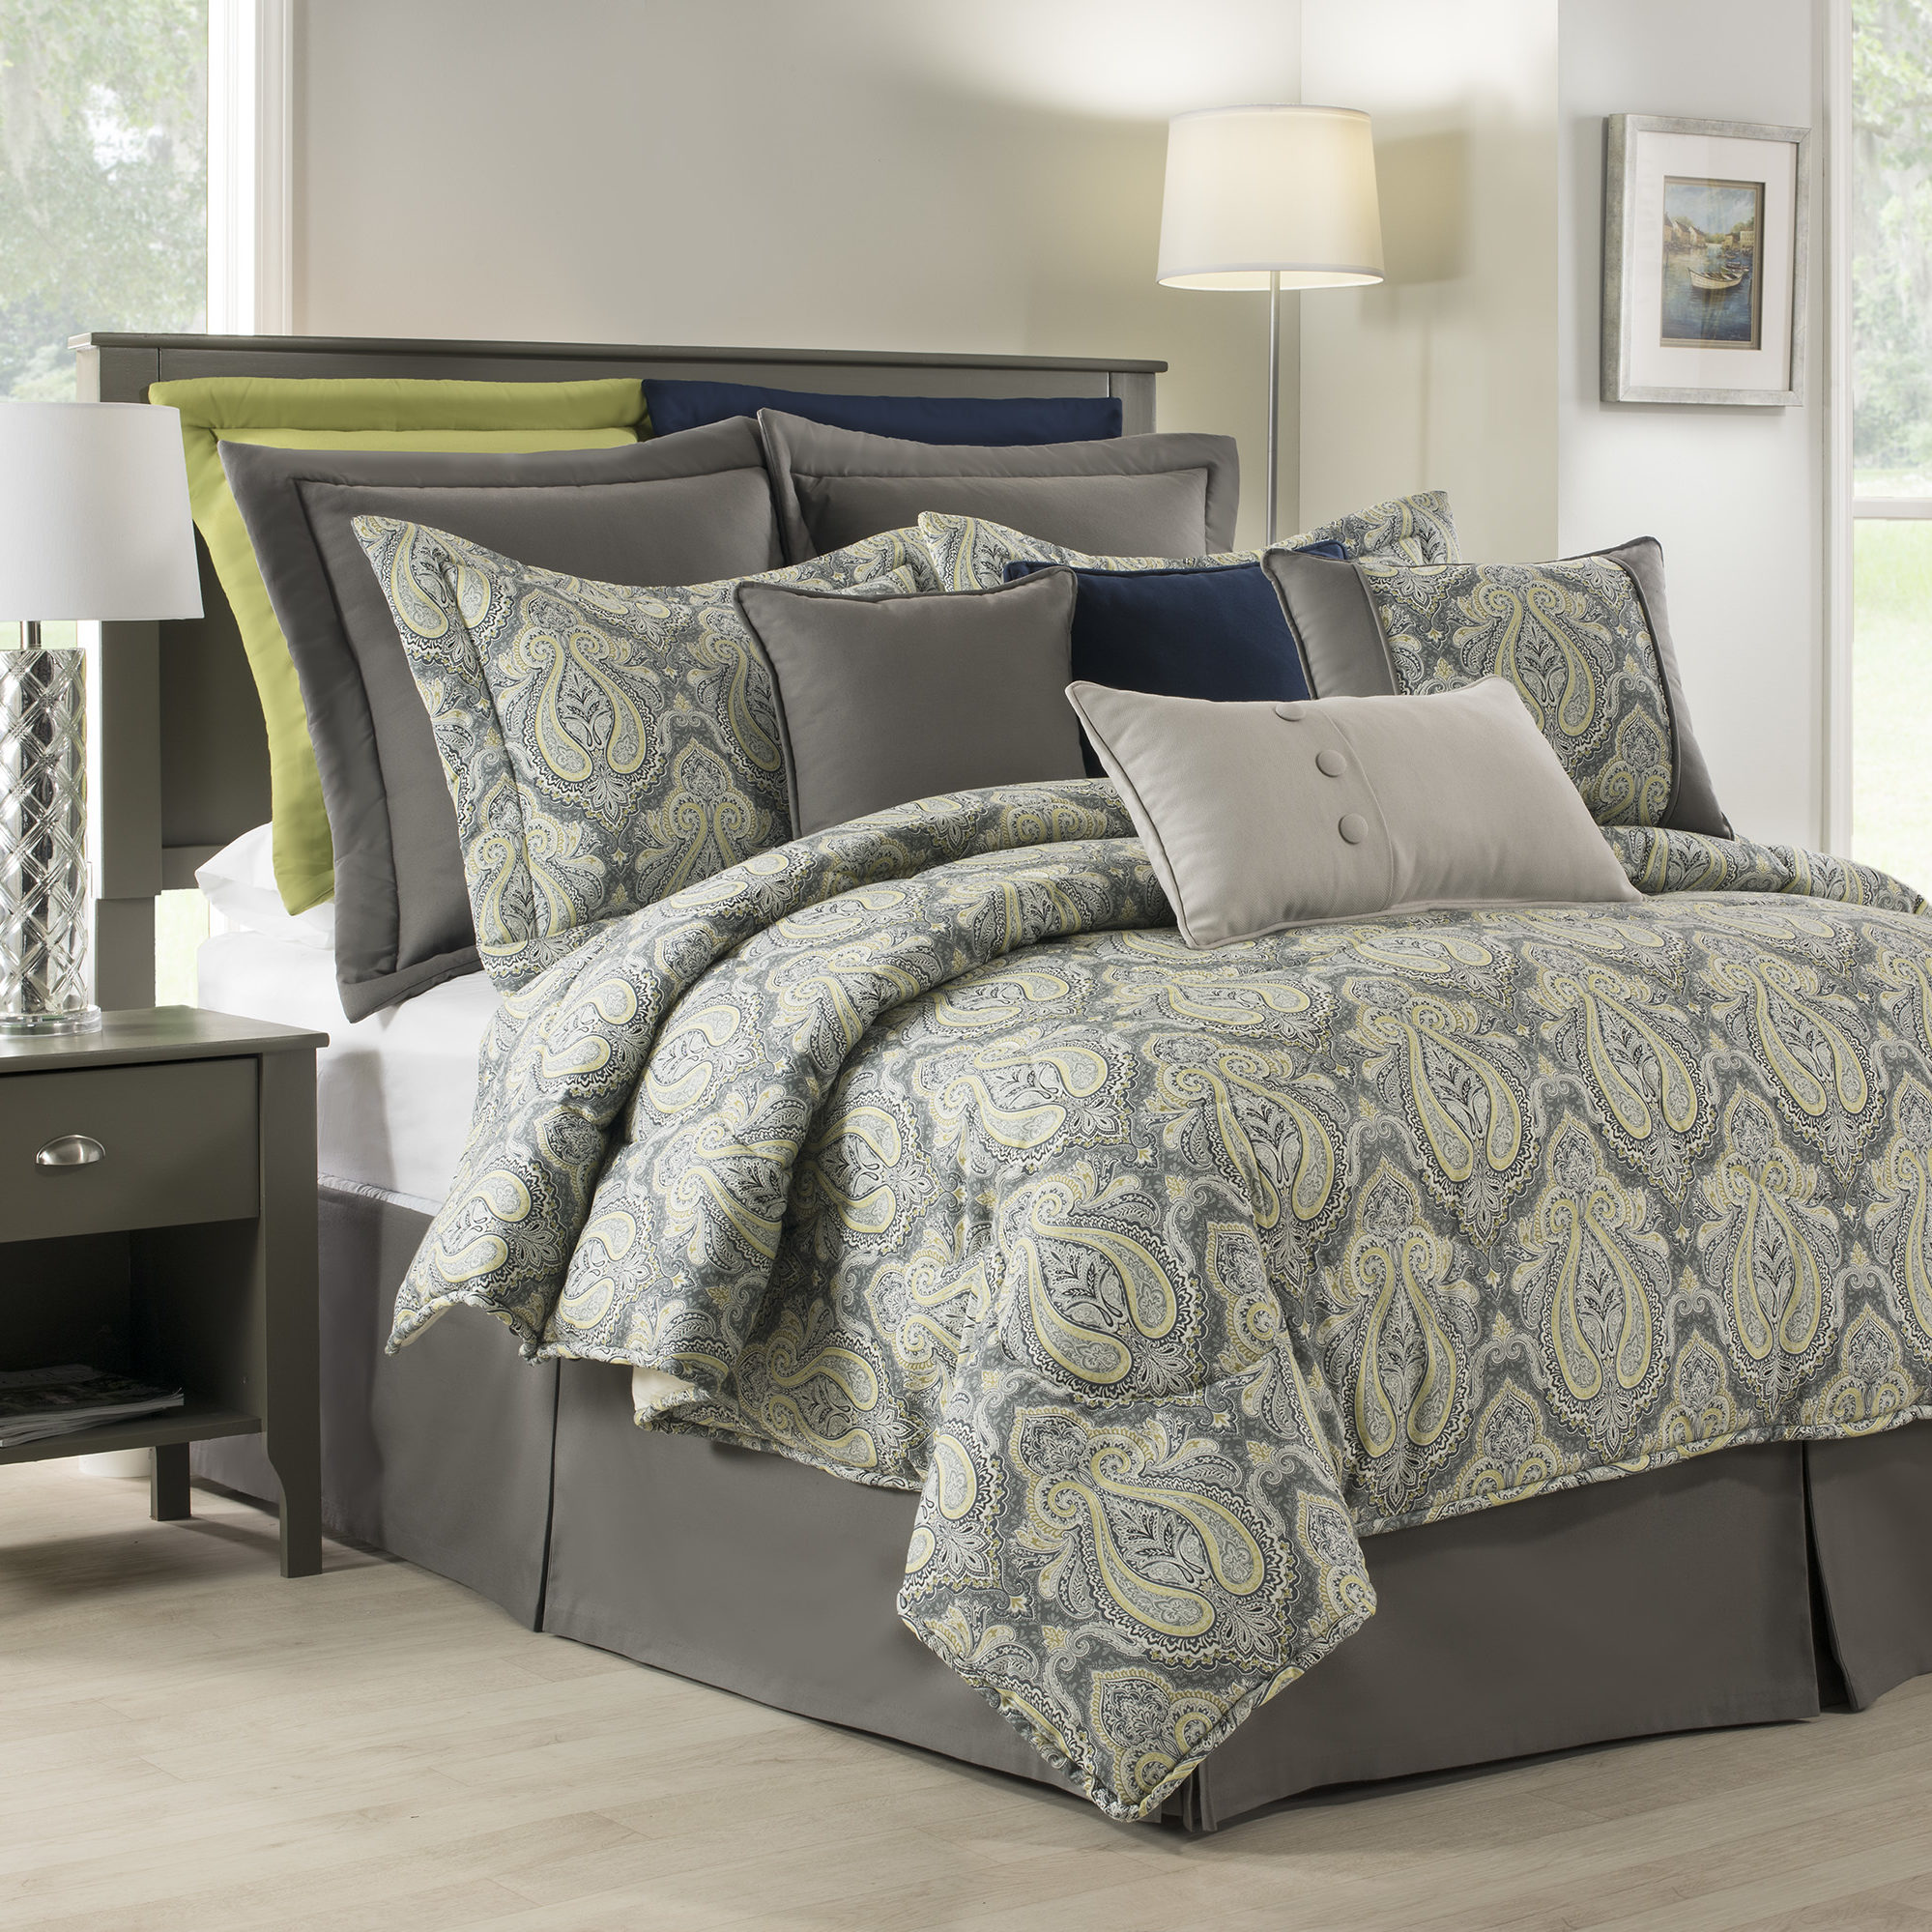 Park Avenue Comforter Set Thomasville, Cal King Bedding Collections